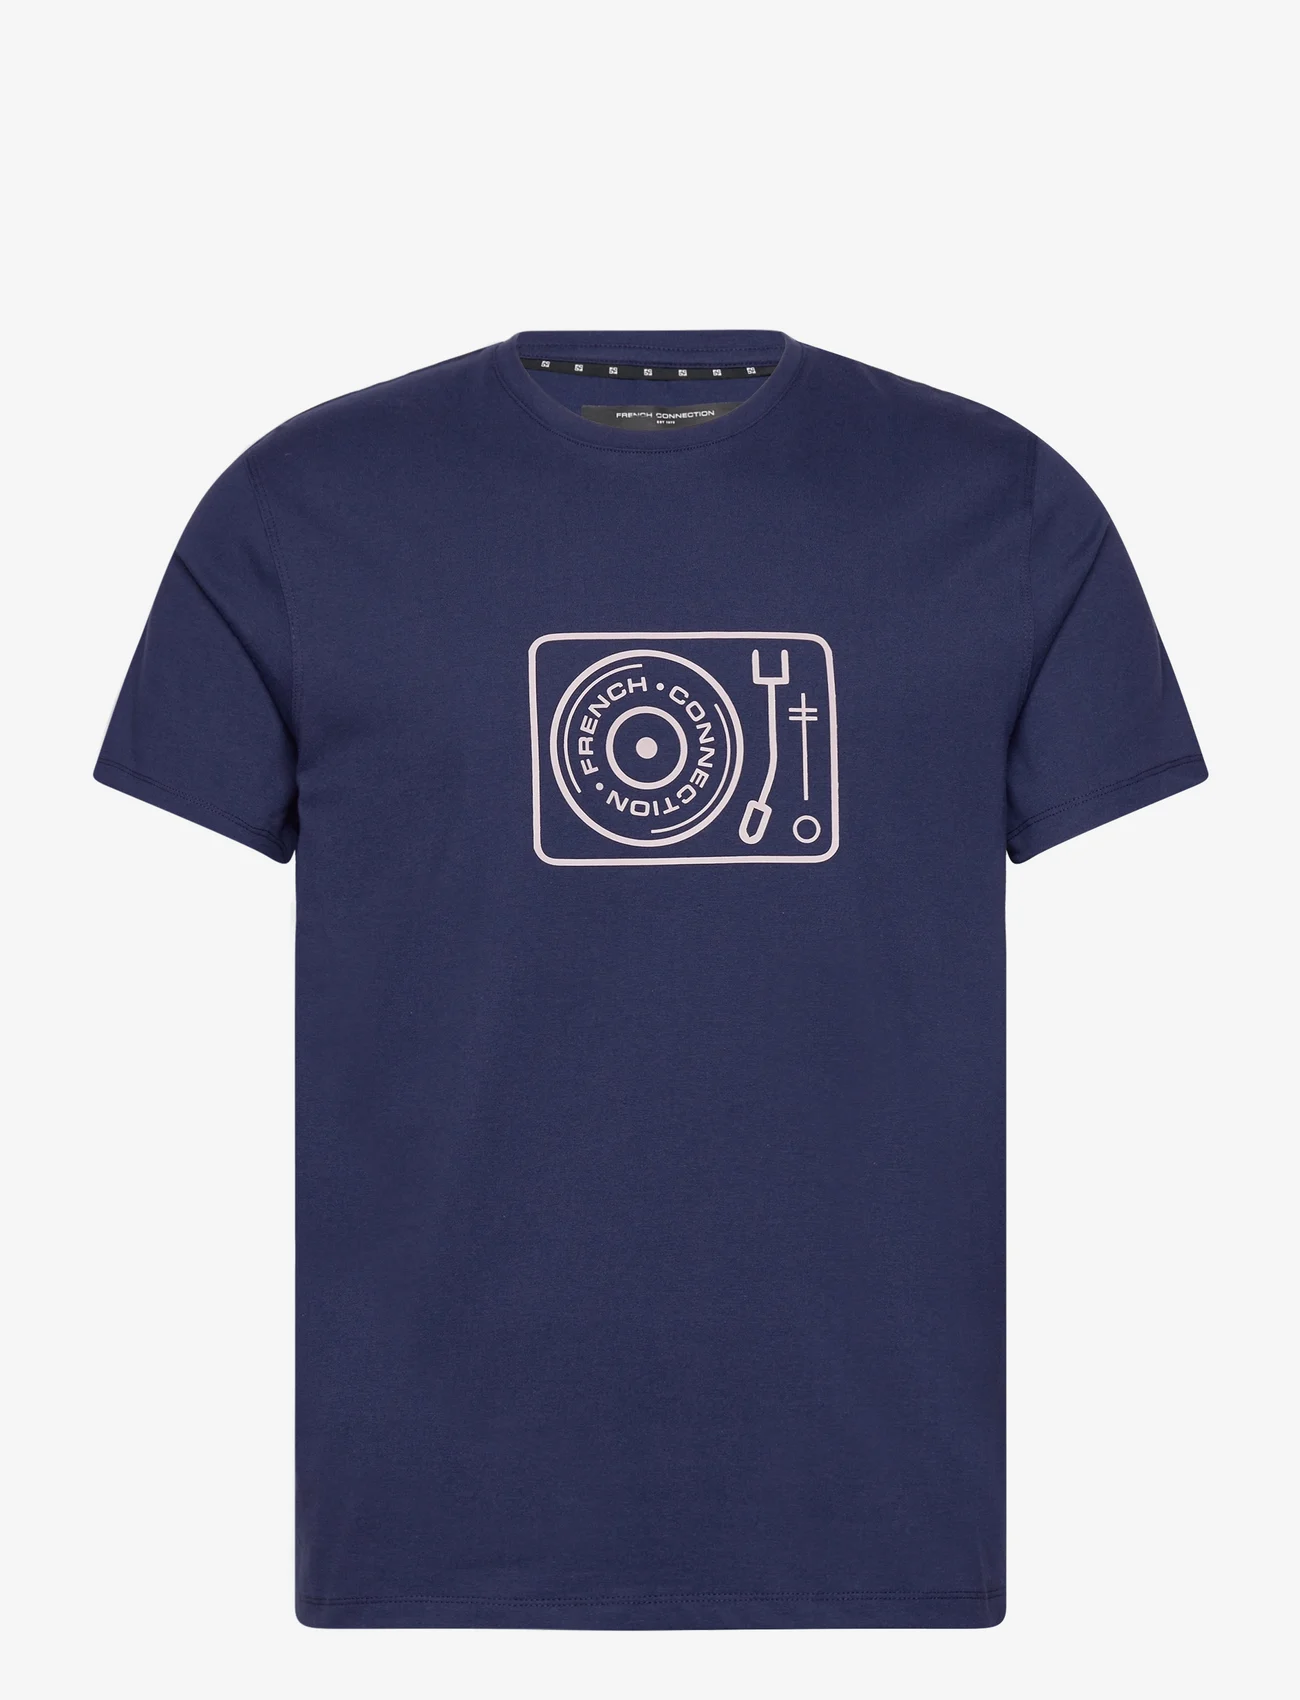 French Connection - TURNTABLE GRAPHIC TEE - t-shirts - navy - 0